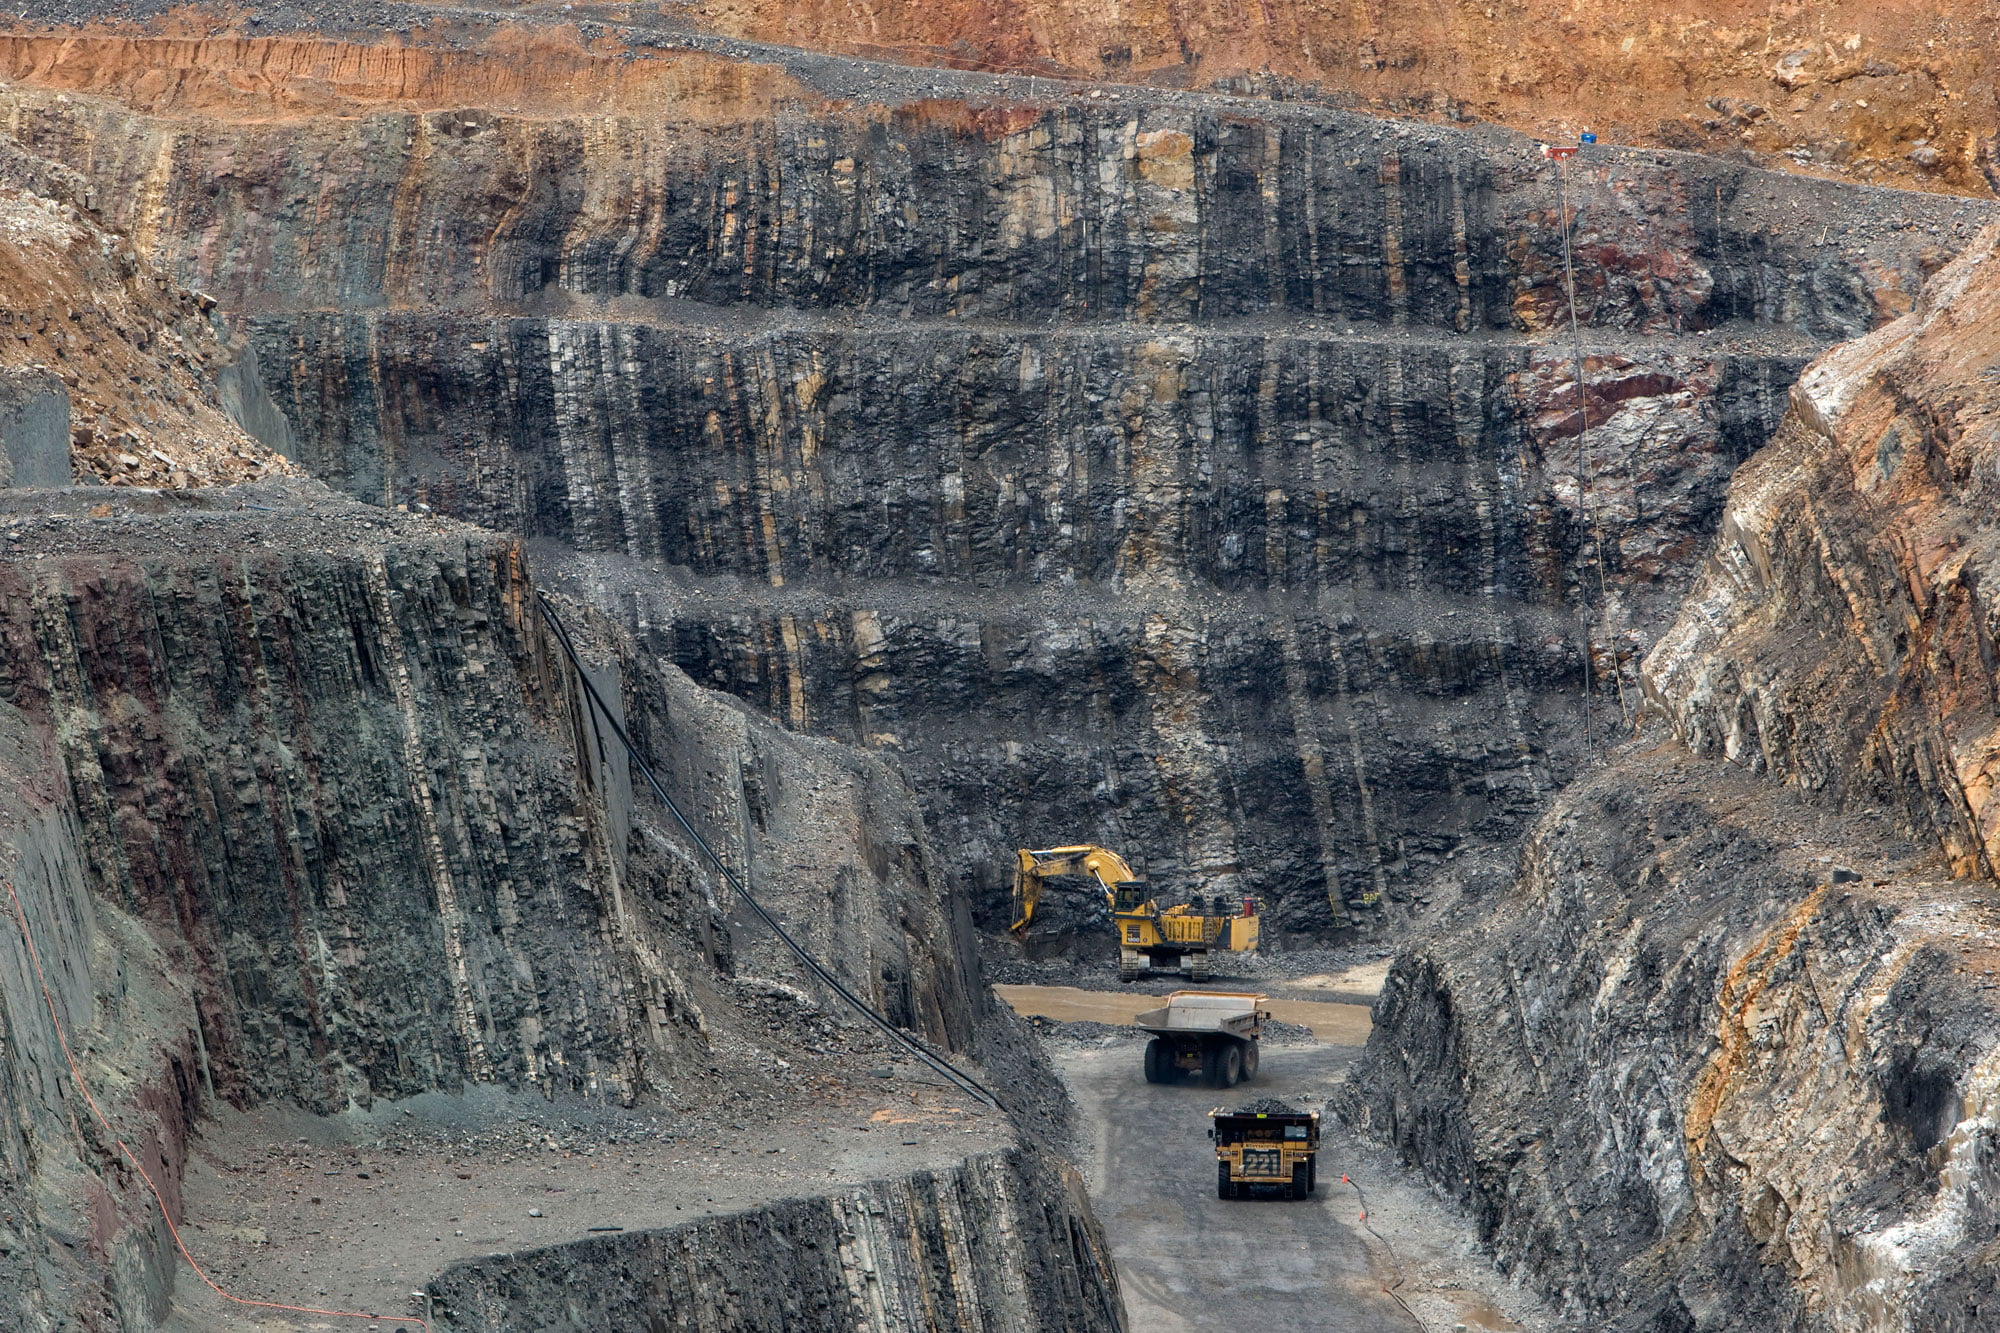 Open pit operations at McArthur River Mining (2008)